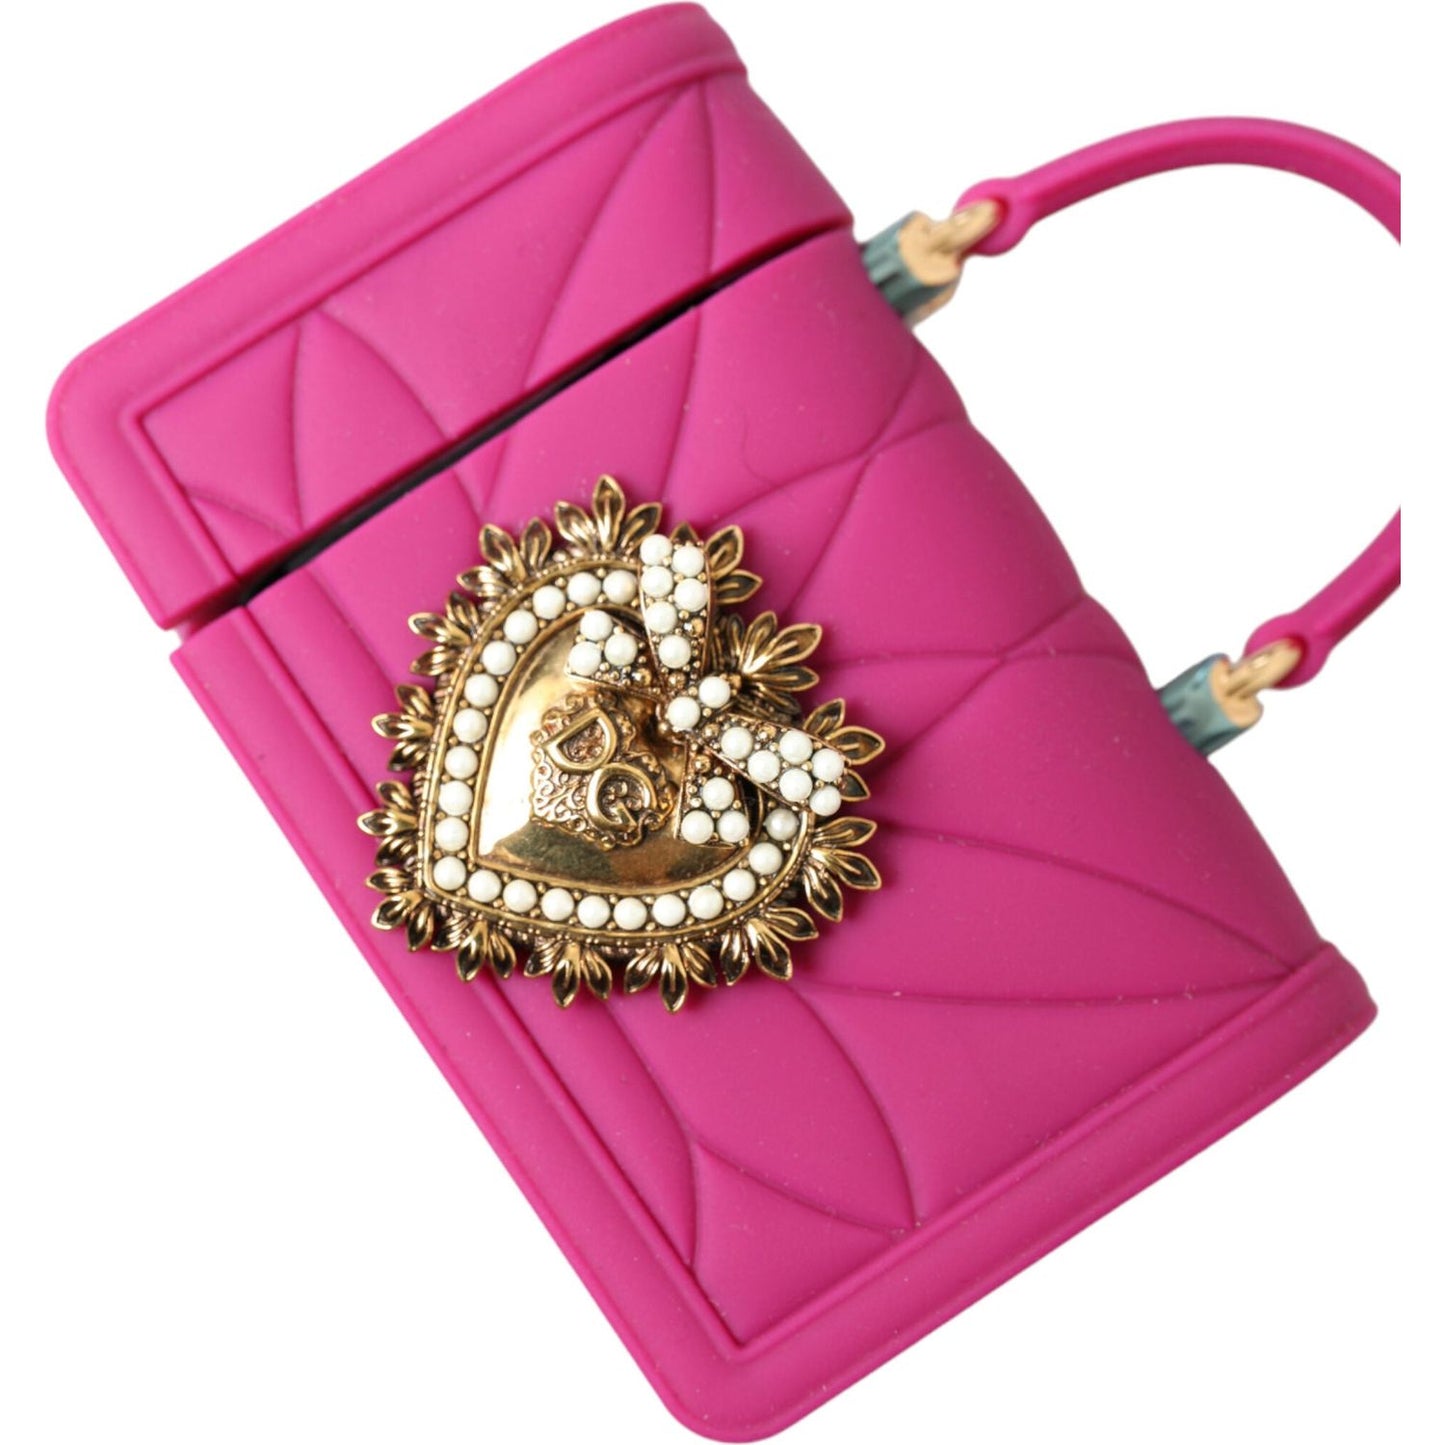 Dolce & Gabbana Chic Quilted Silicone Airpods Case - Pink & Gold pink-silicone-devotion-heart-bag-gold-chain-airpods-case